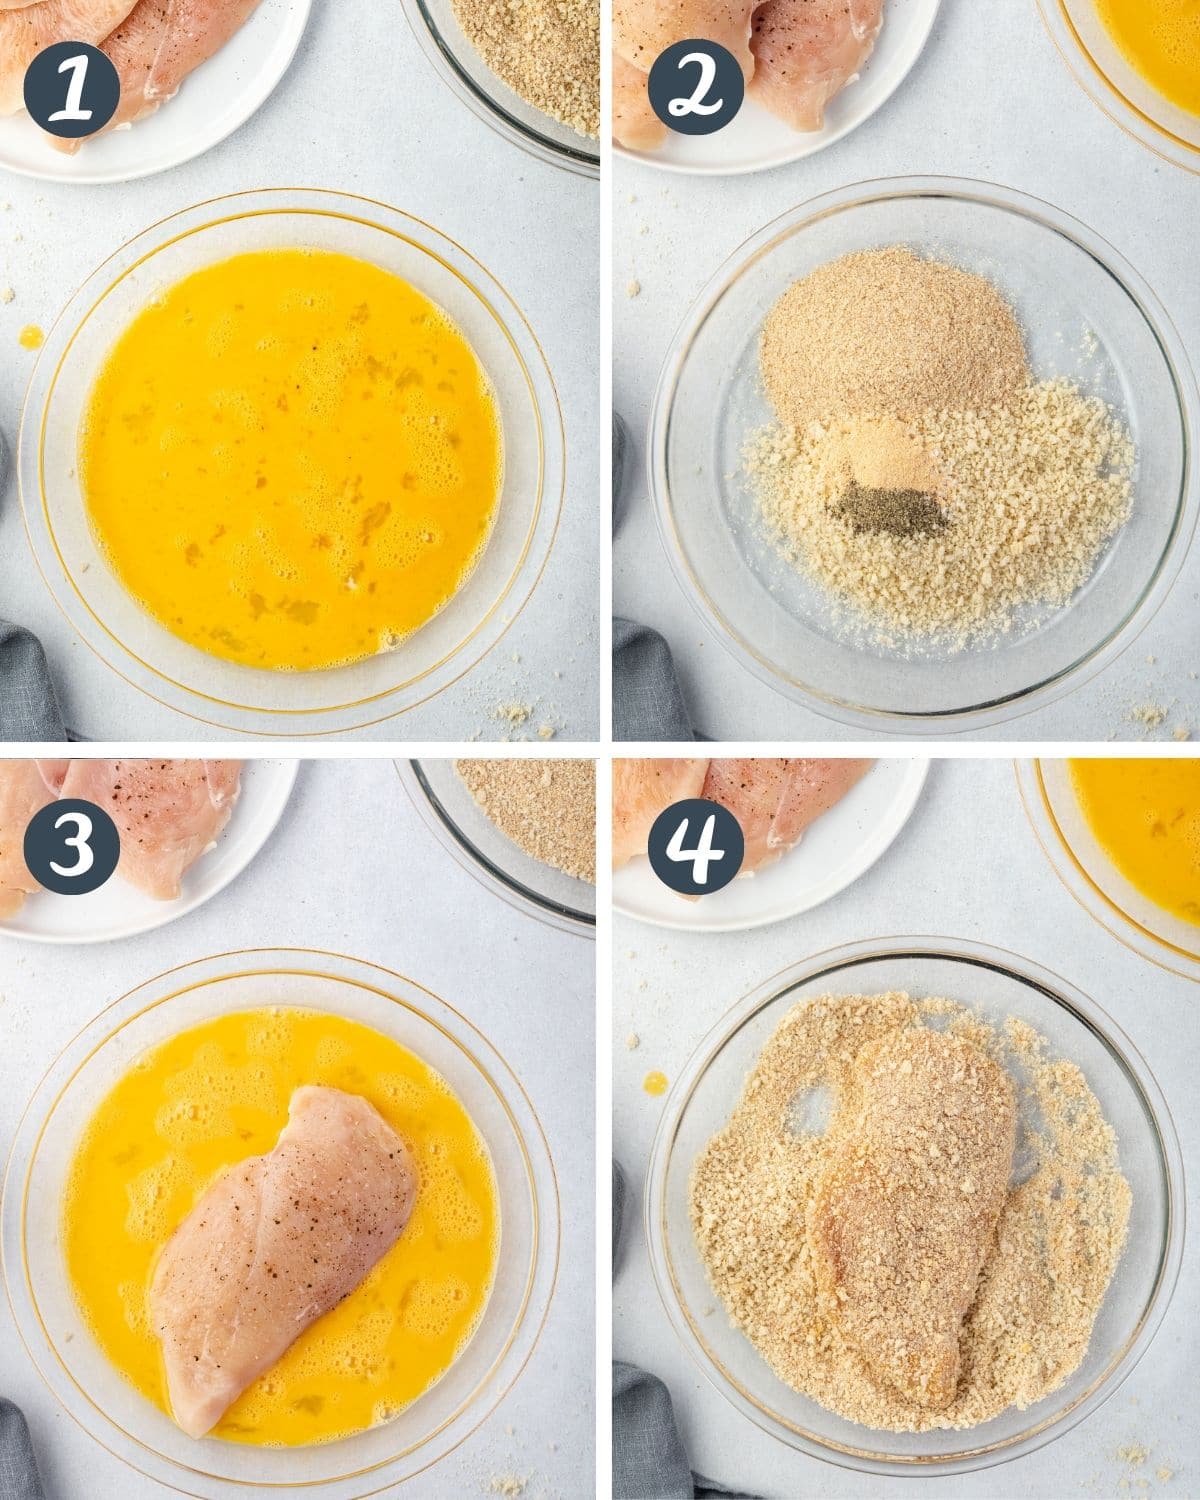 Collage showing steps to coat chicken in eggs and bread crumbs.